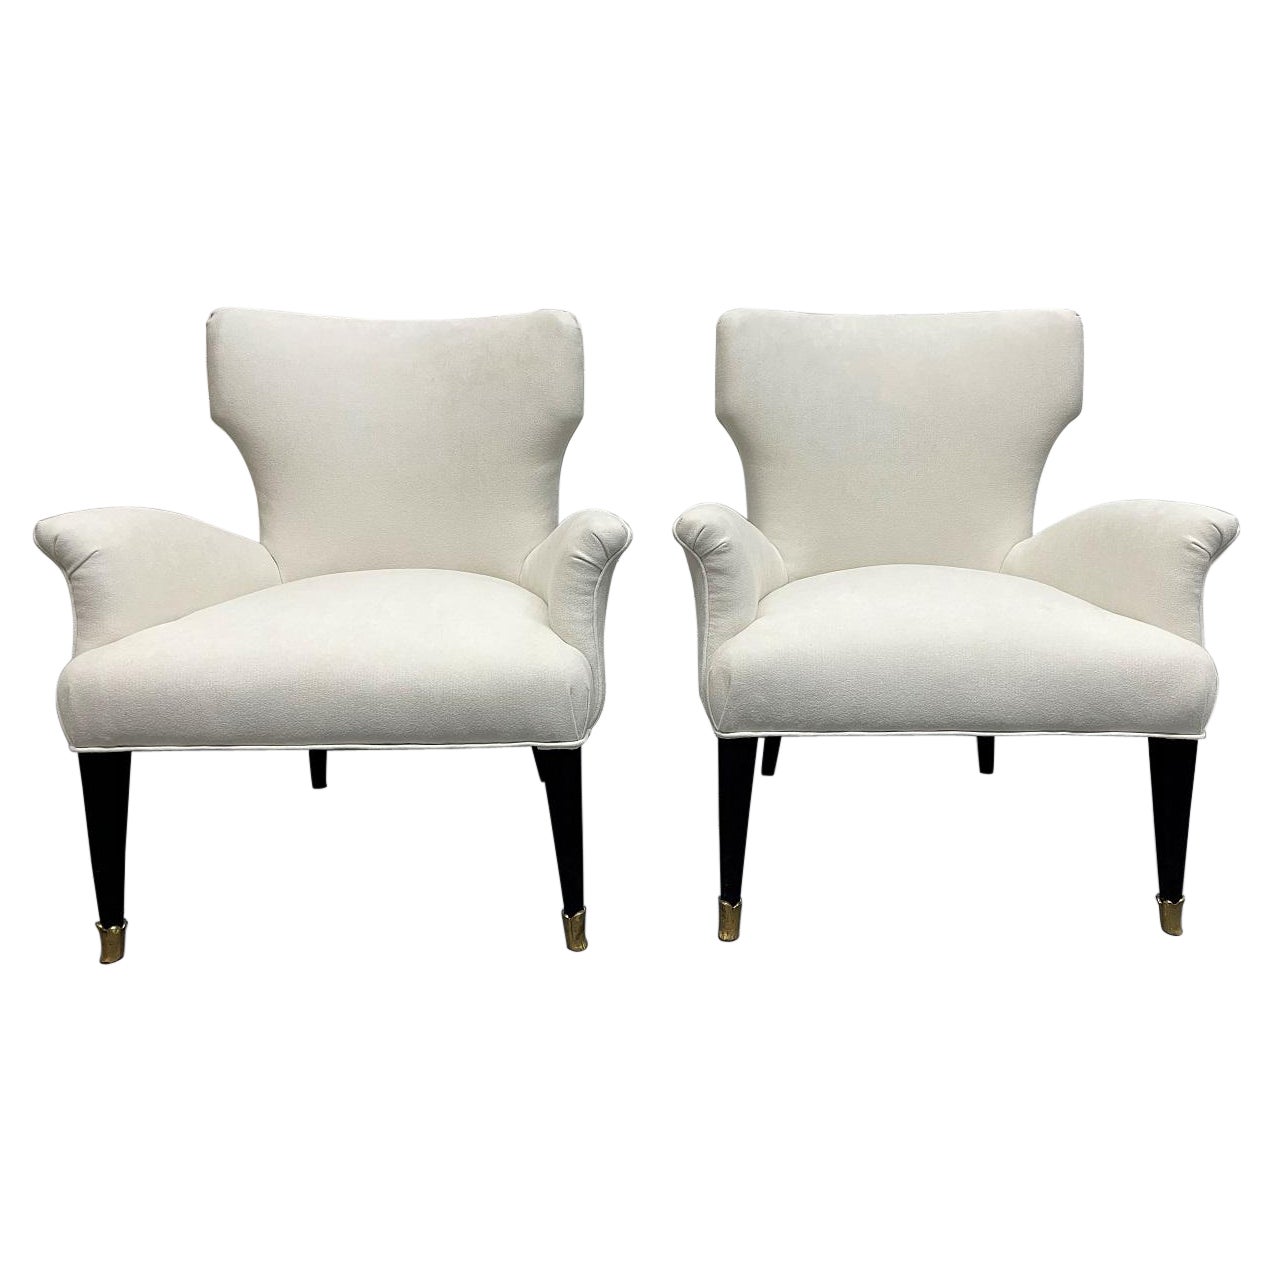 Pair of 1960s Italian Small Slipper Chairs For Sale